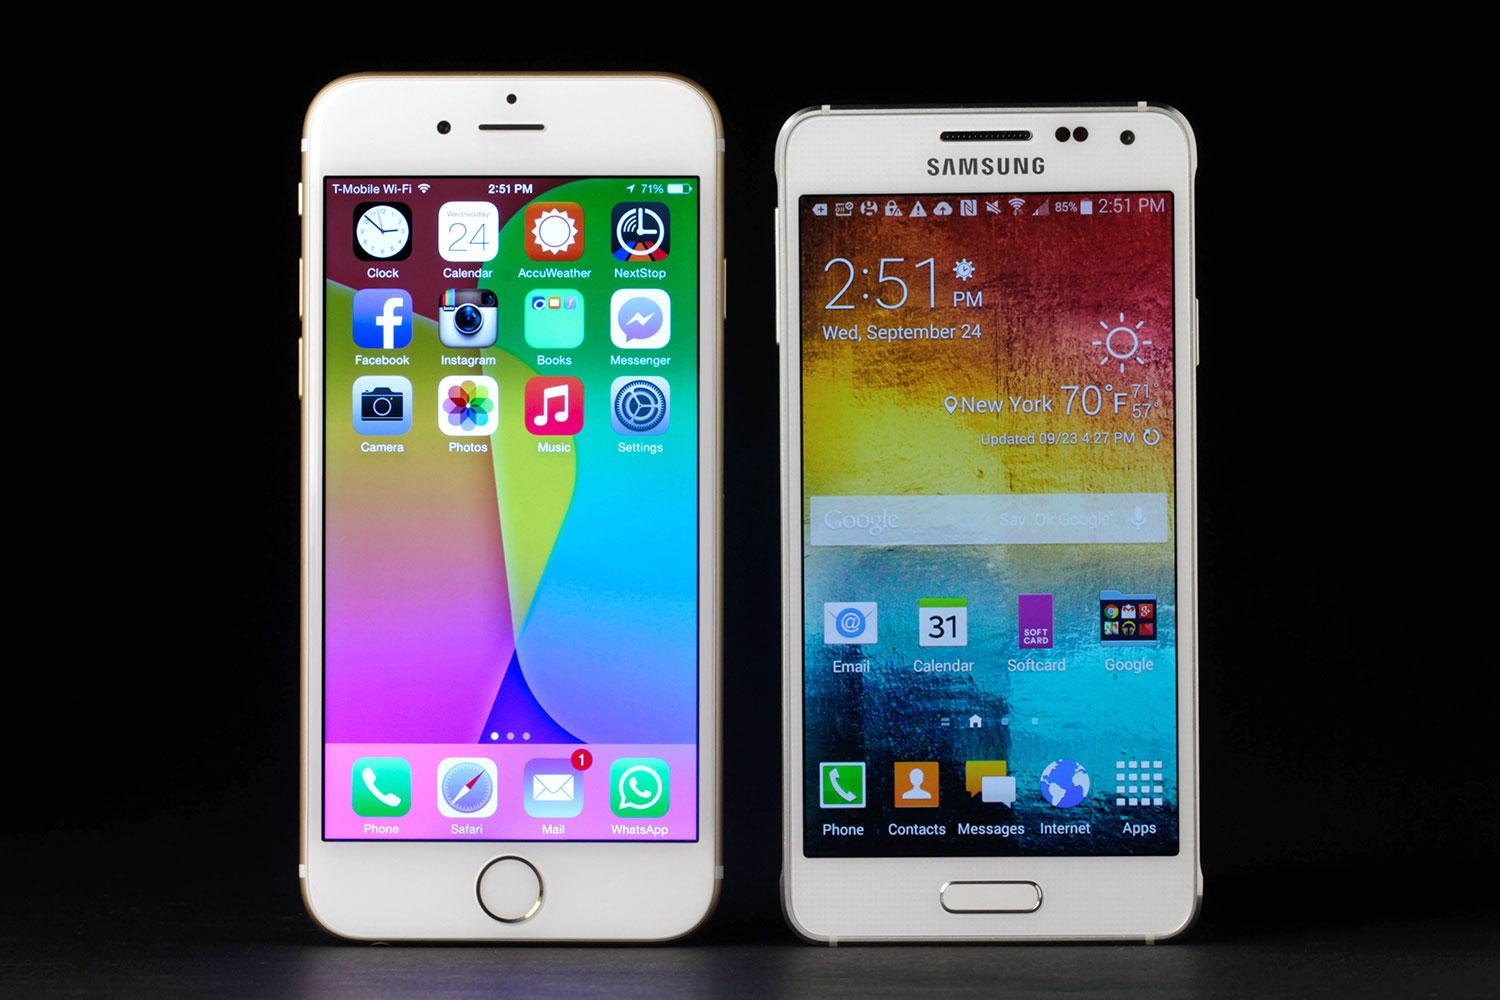 Galaxy Alpha Review: an iPhone copy from Samsung?